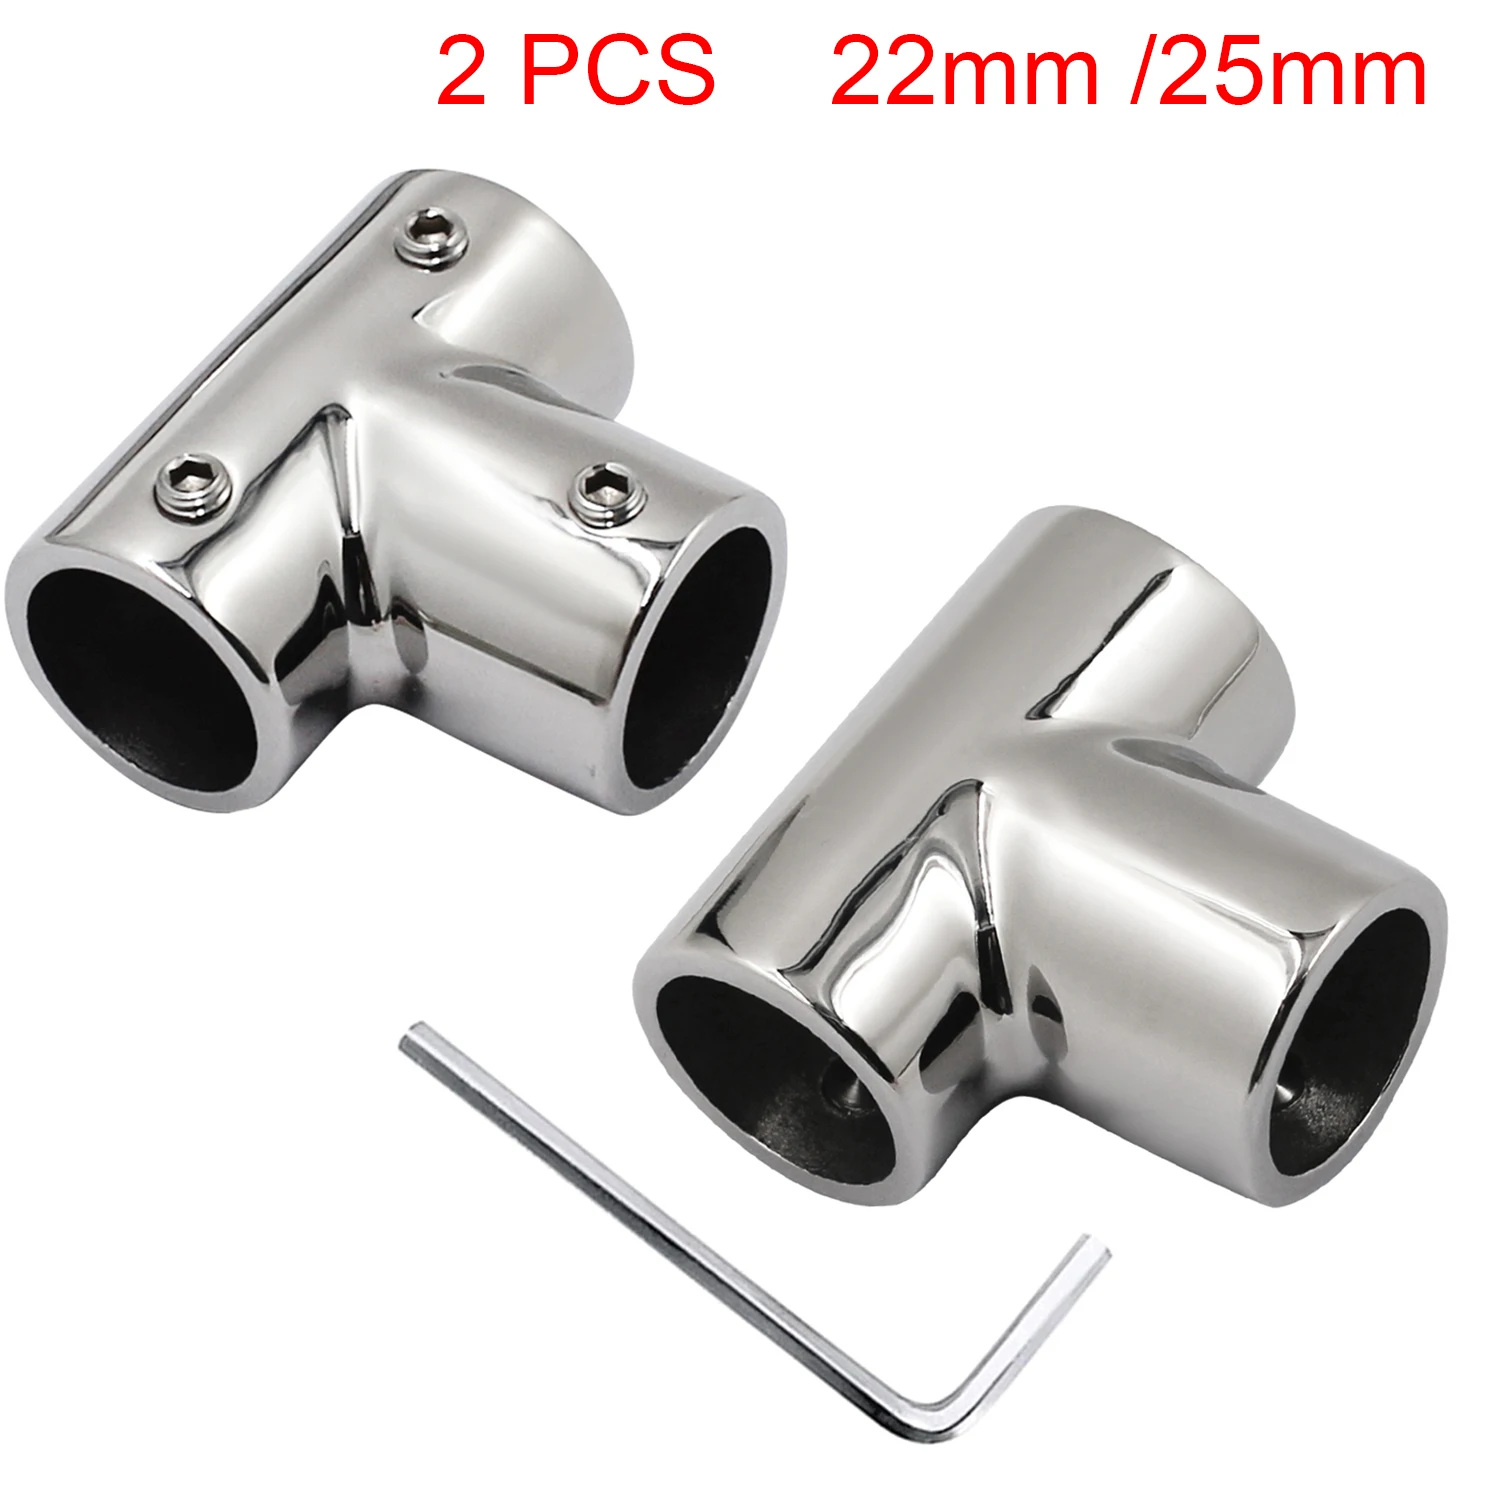 2 Pcs Stainless Steel 316 Marine Boat 3 Way Handrail Fitting 90° Deck Hand Rail Tee Joint Connector for 22mm/25mm Tube/Pipe 2 pcs boat hand rail fitting 90 degree 22mm 25mm stanchion base marine stainless steel 316